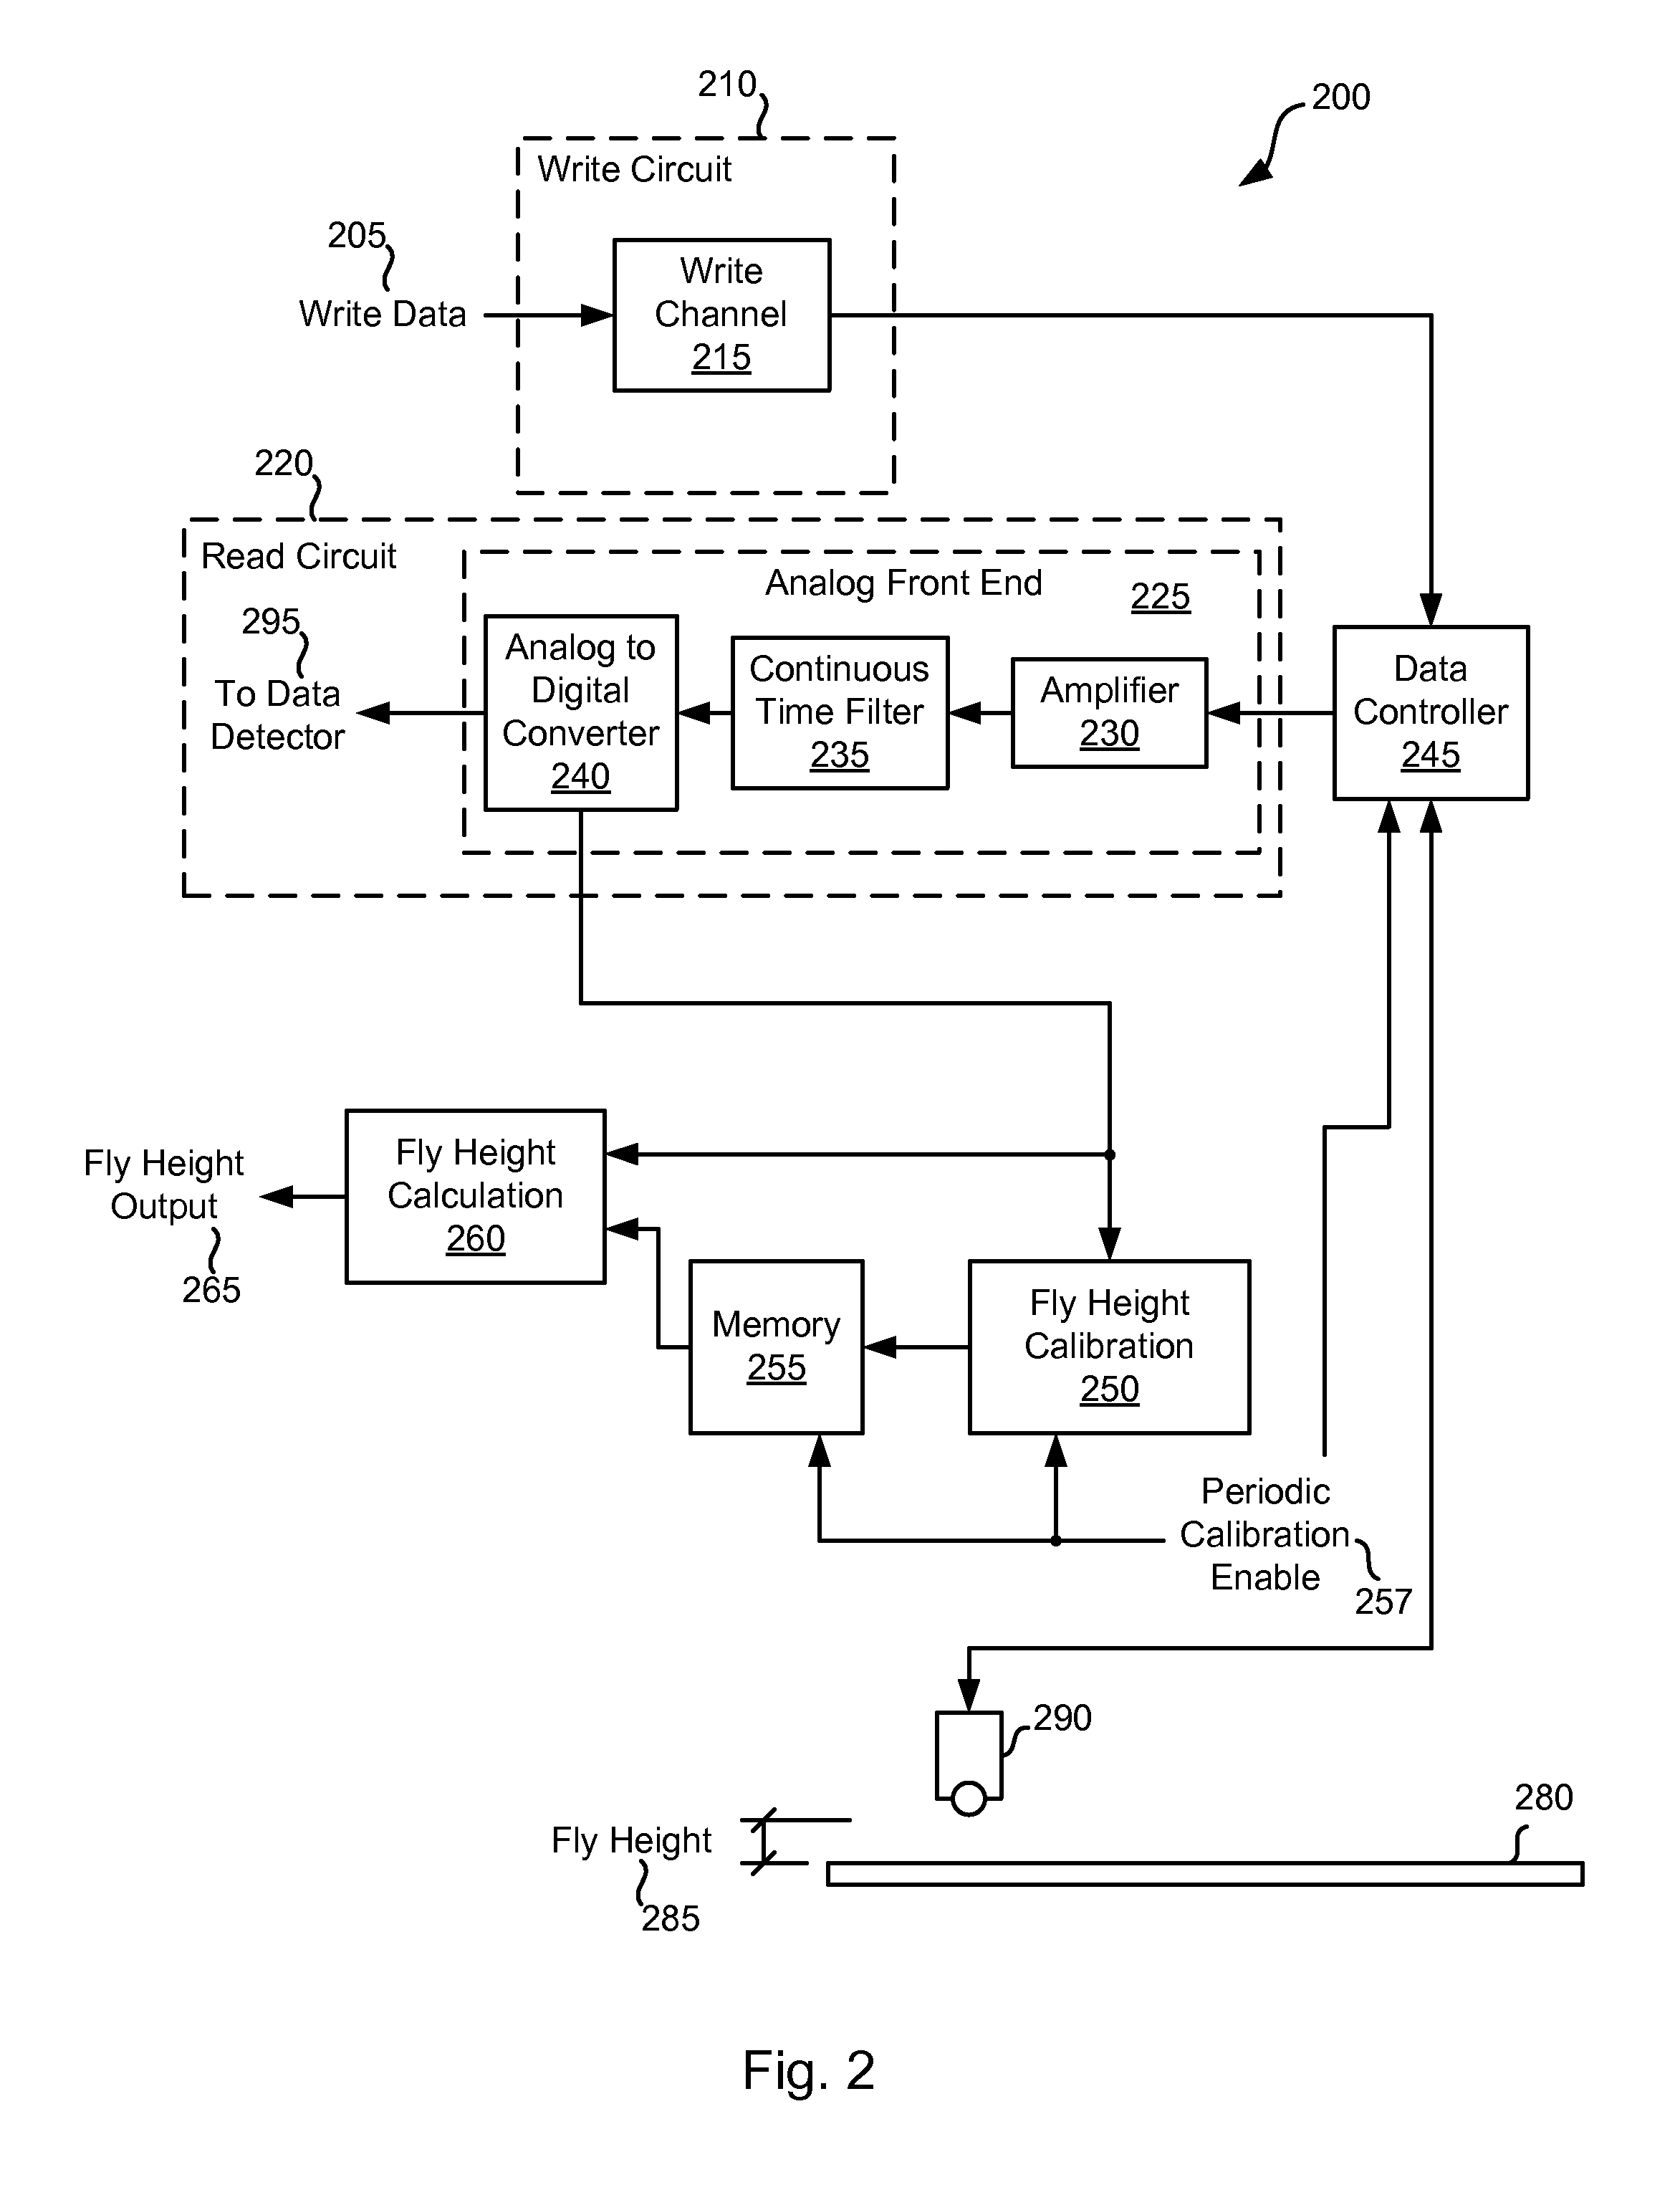 Systems and methods for variable fly height measurement